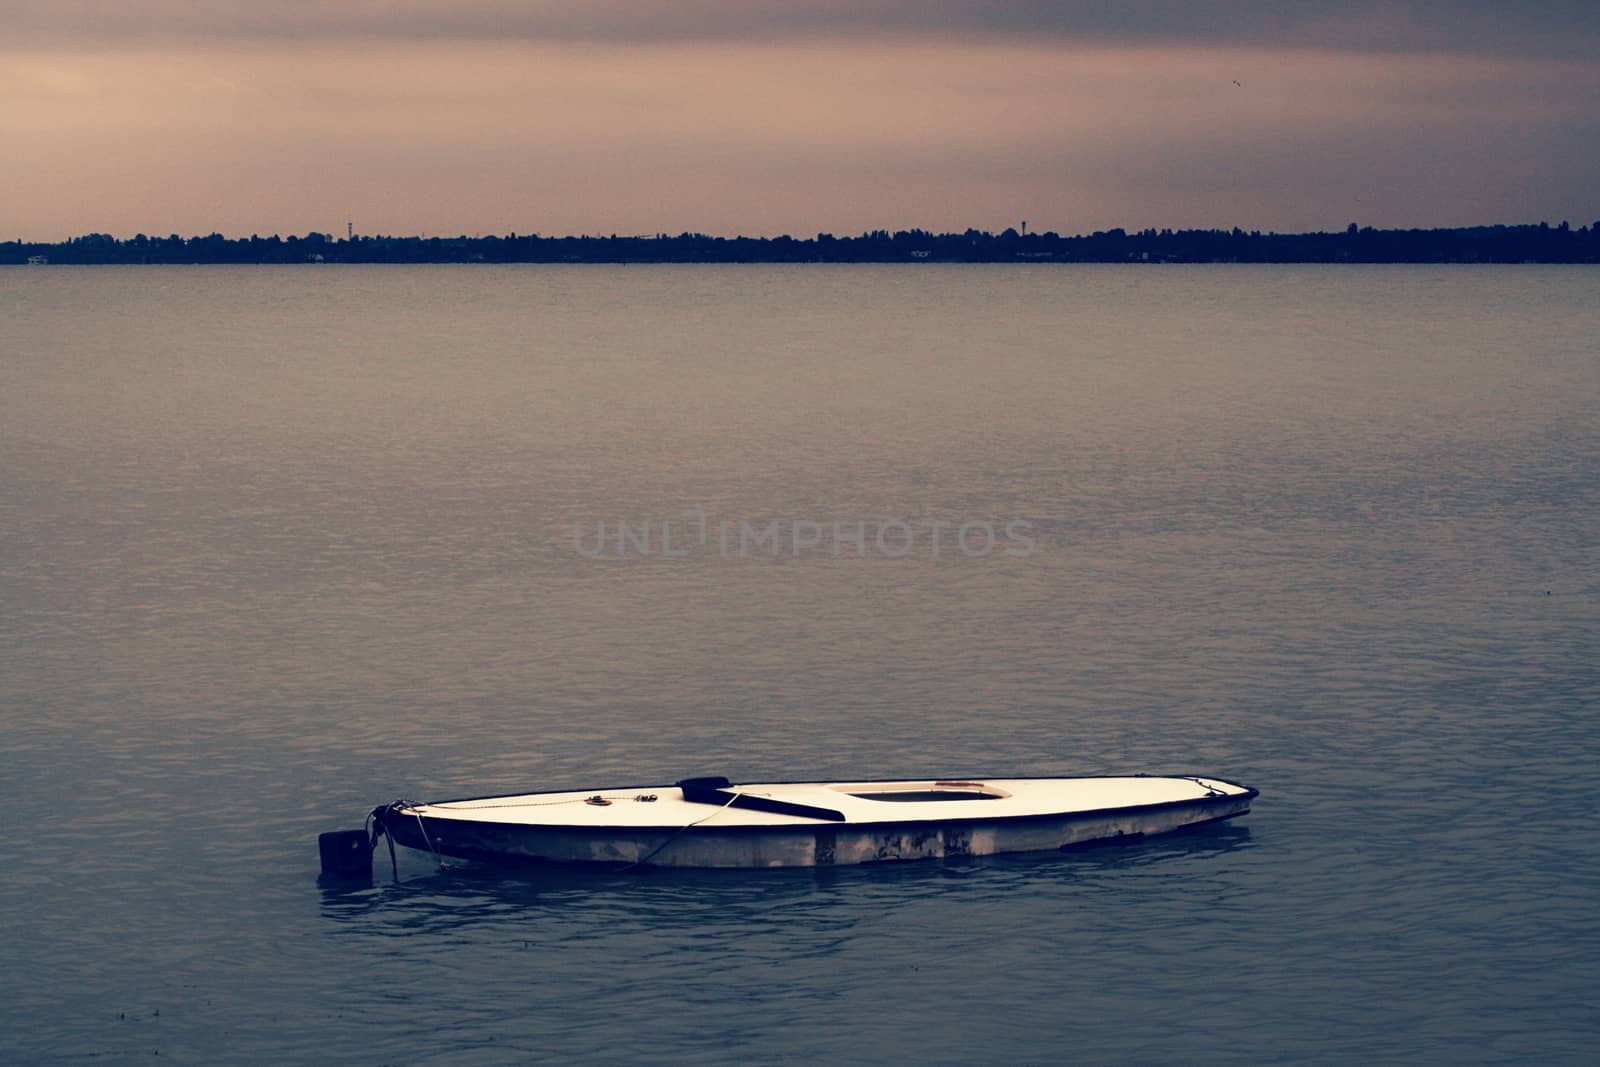 A small boat in a large body of water by balage941